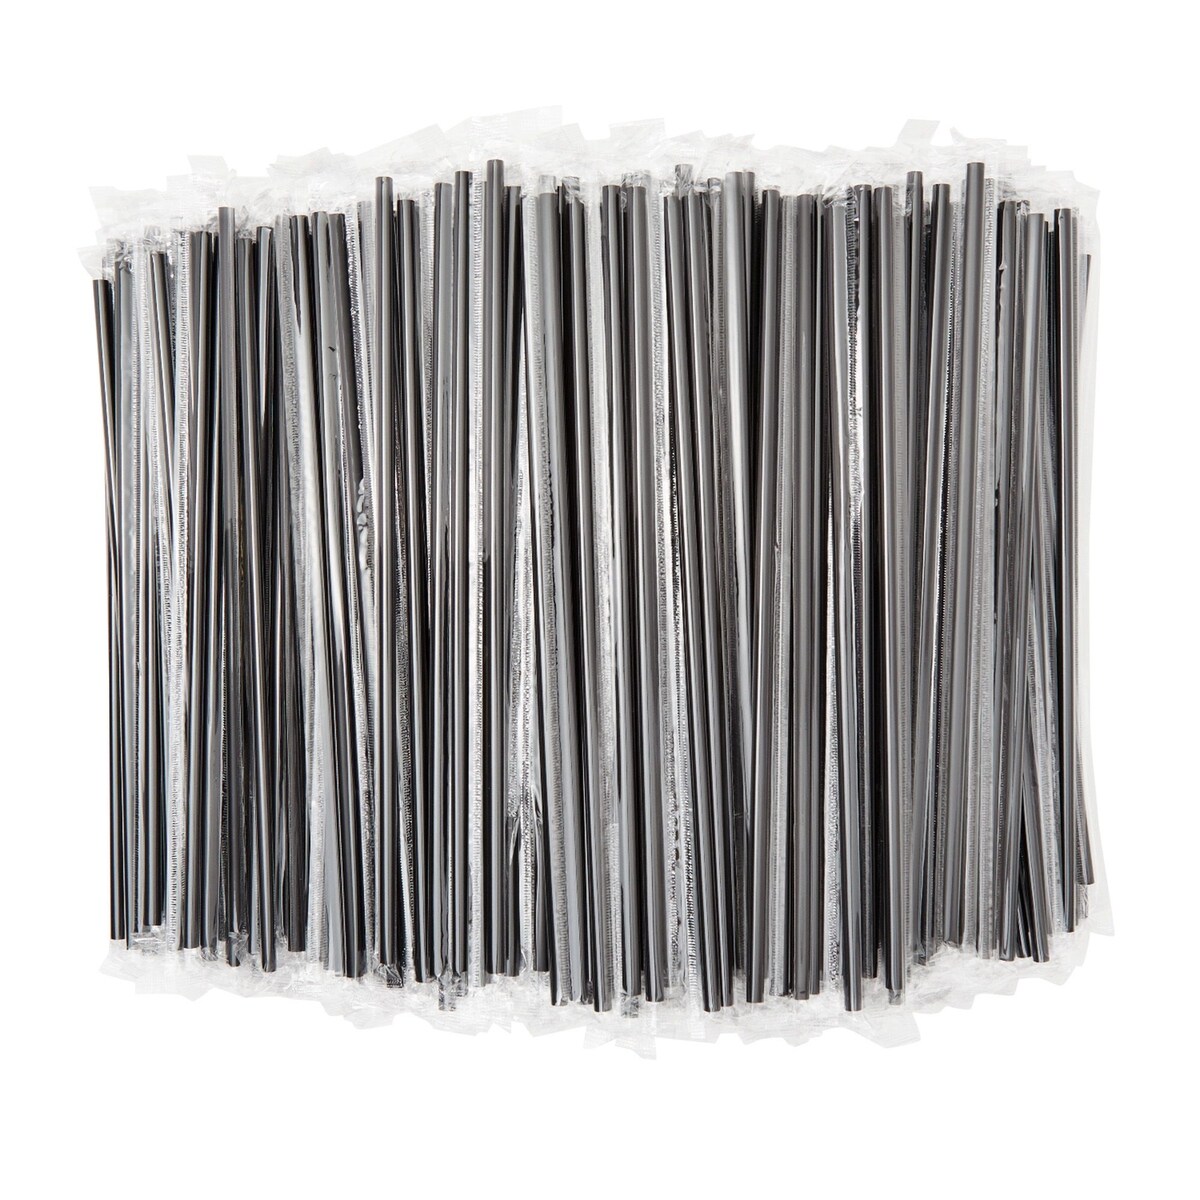 Steel Aluminum And White Plastic Drinking Straw In Glass And